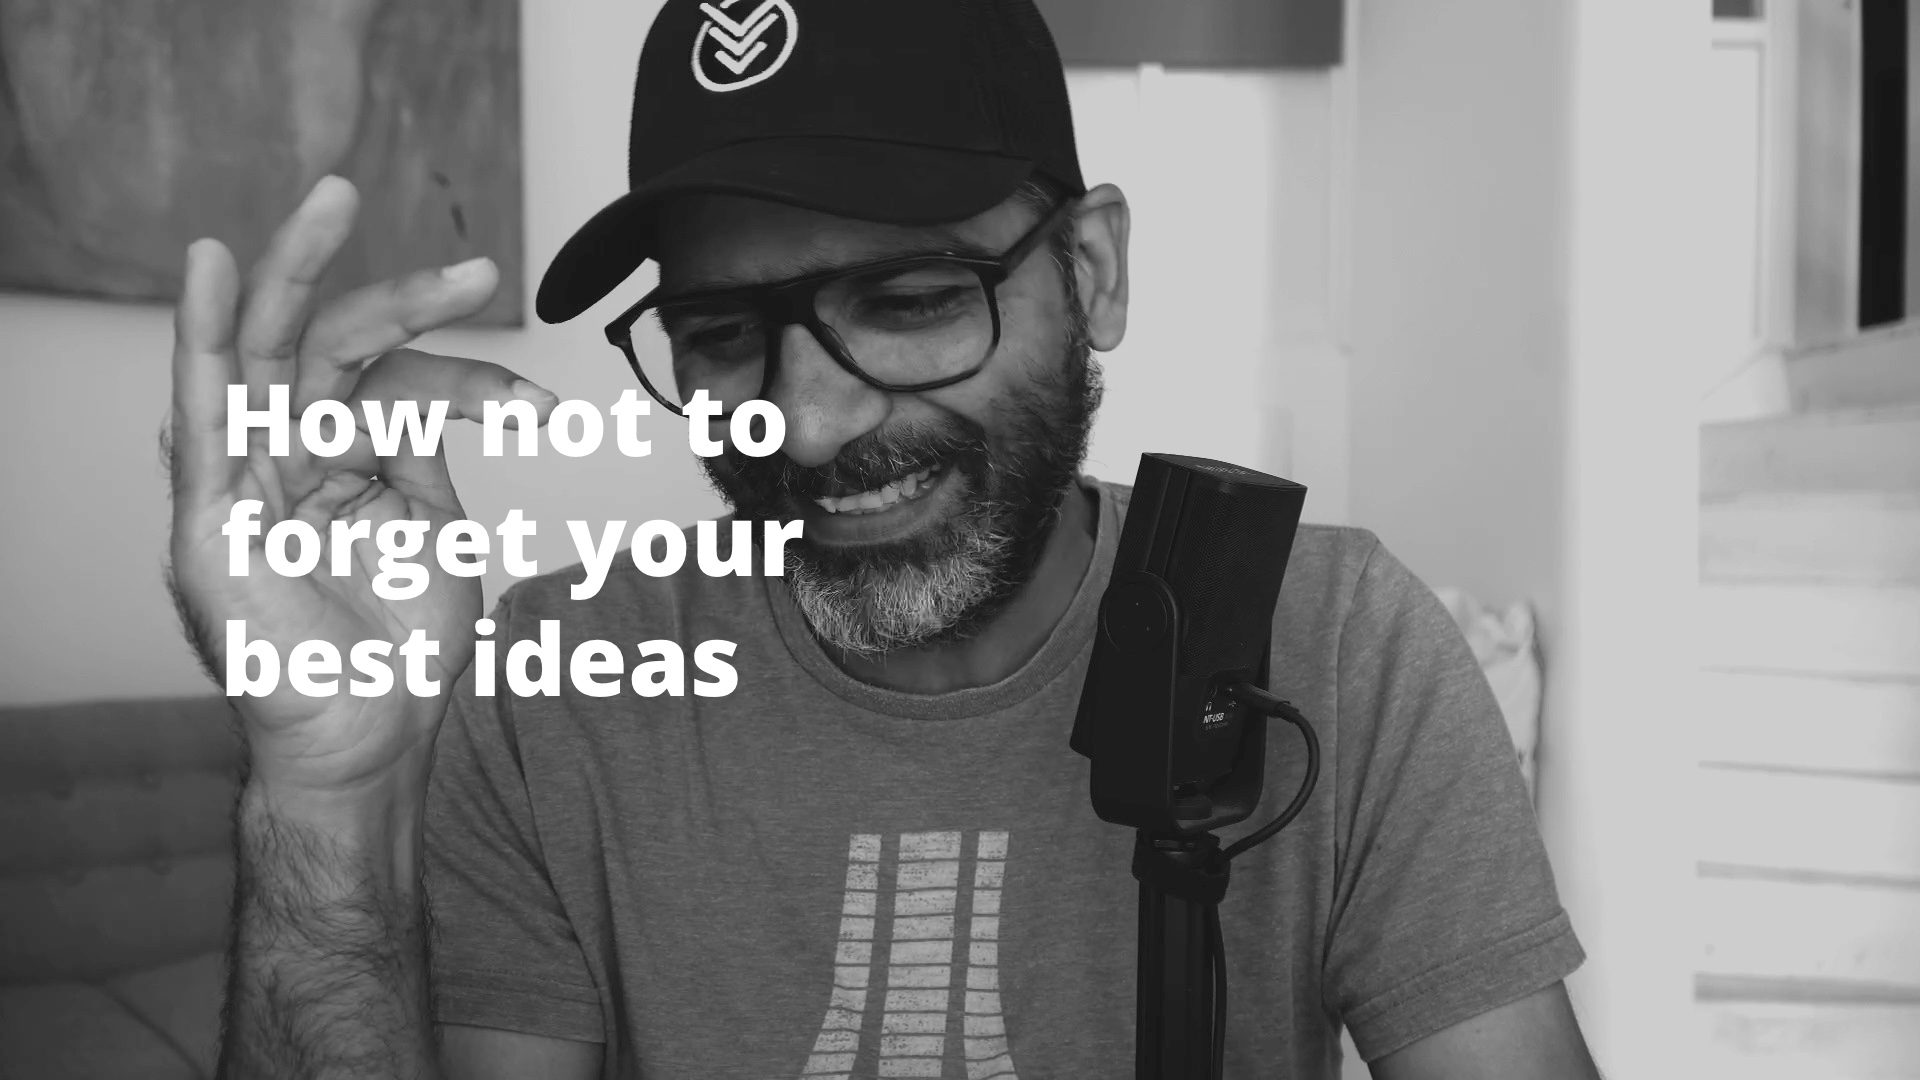 How not to forget your best ideas